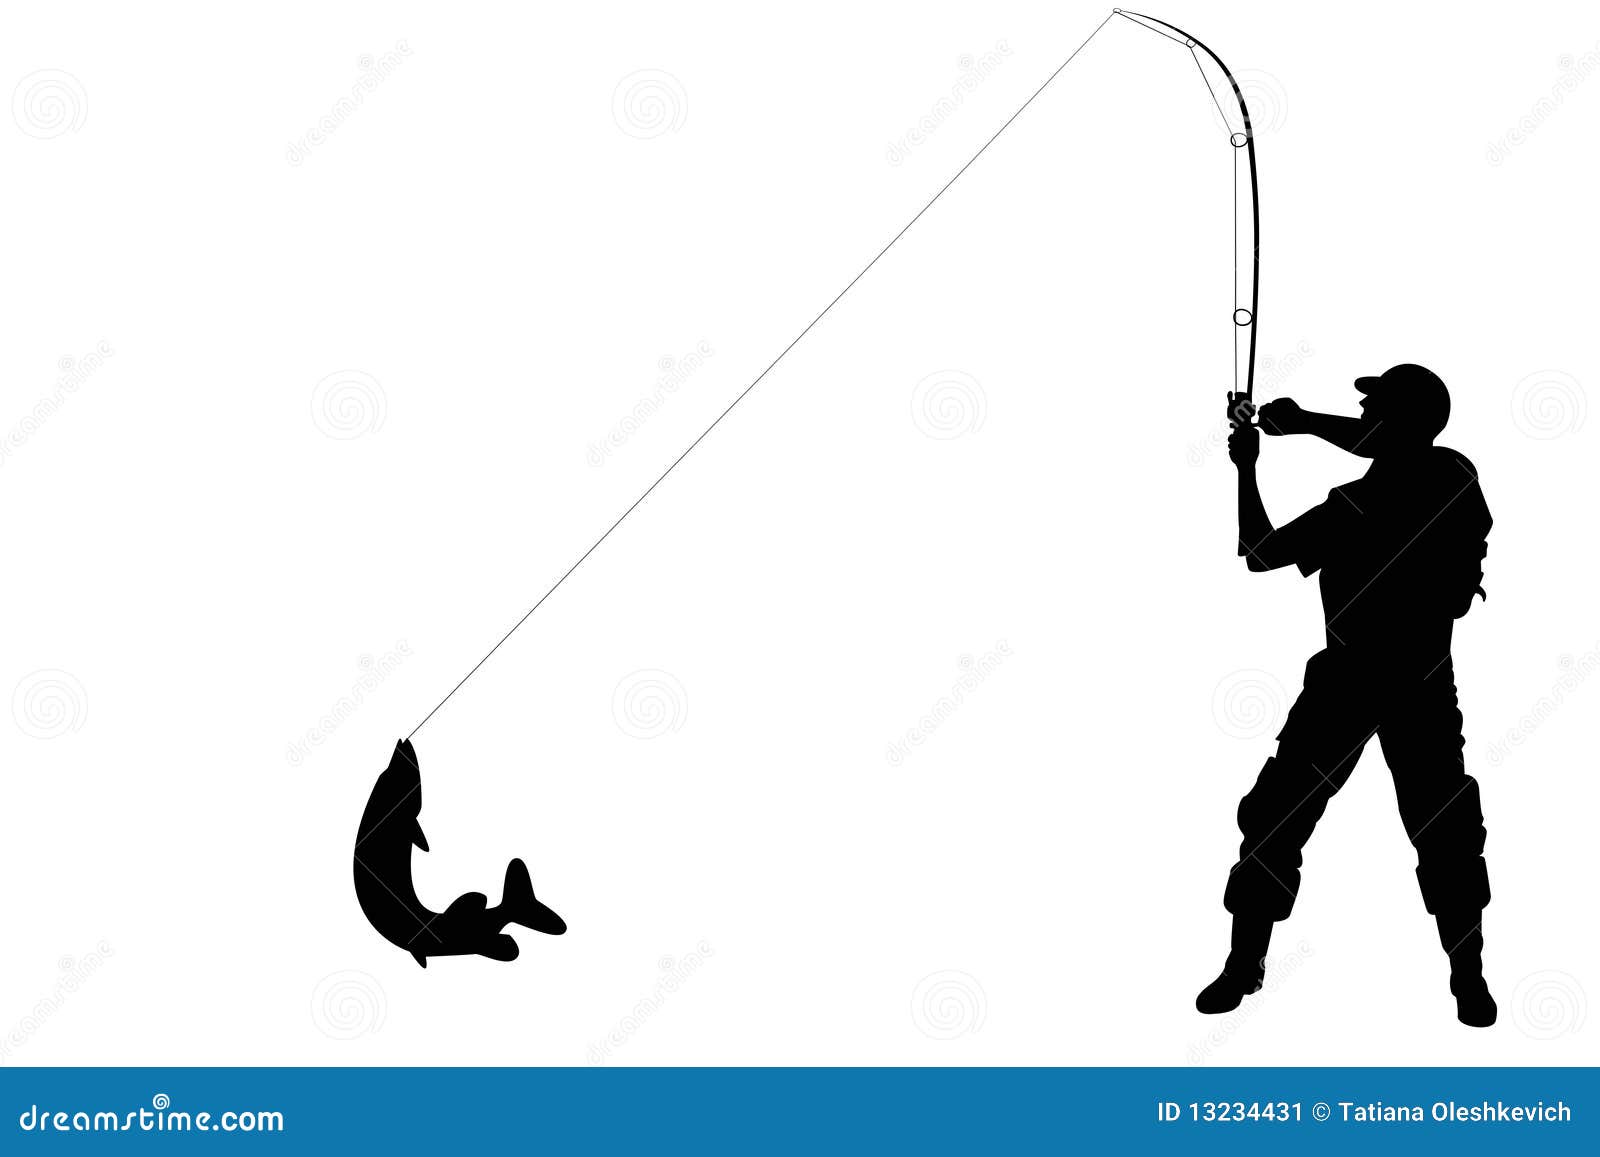 Download Silhouette Of A Fisherman With A Pike Fish Stock Illustration - Illustration of reel, hook: 13234431